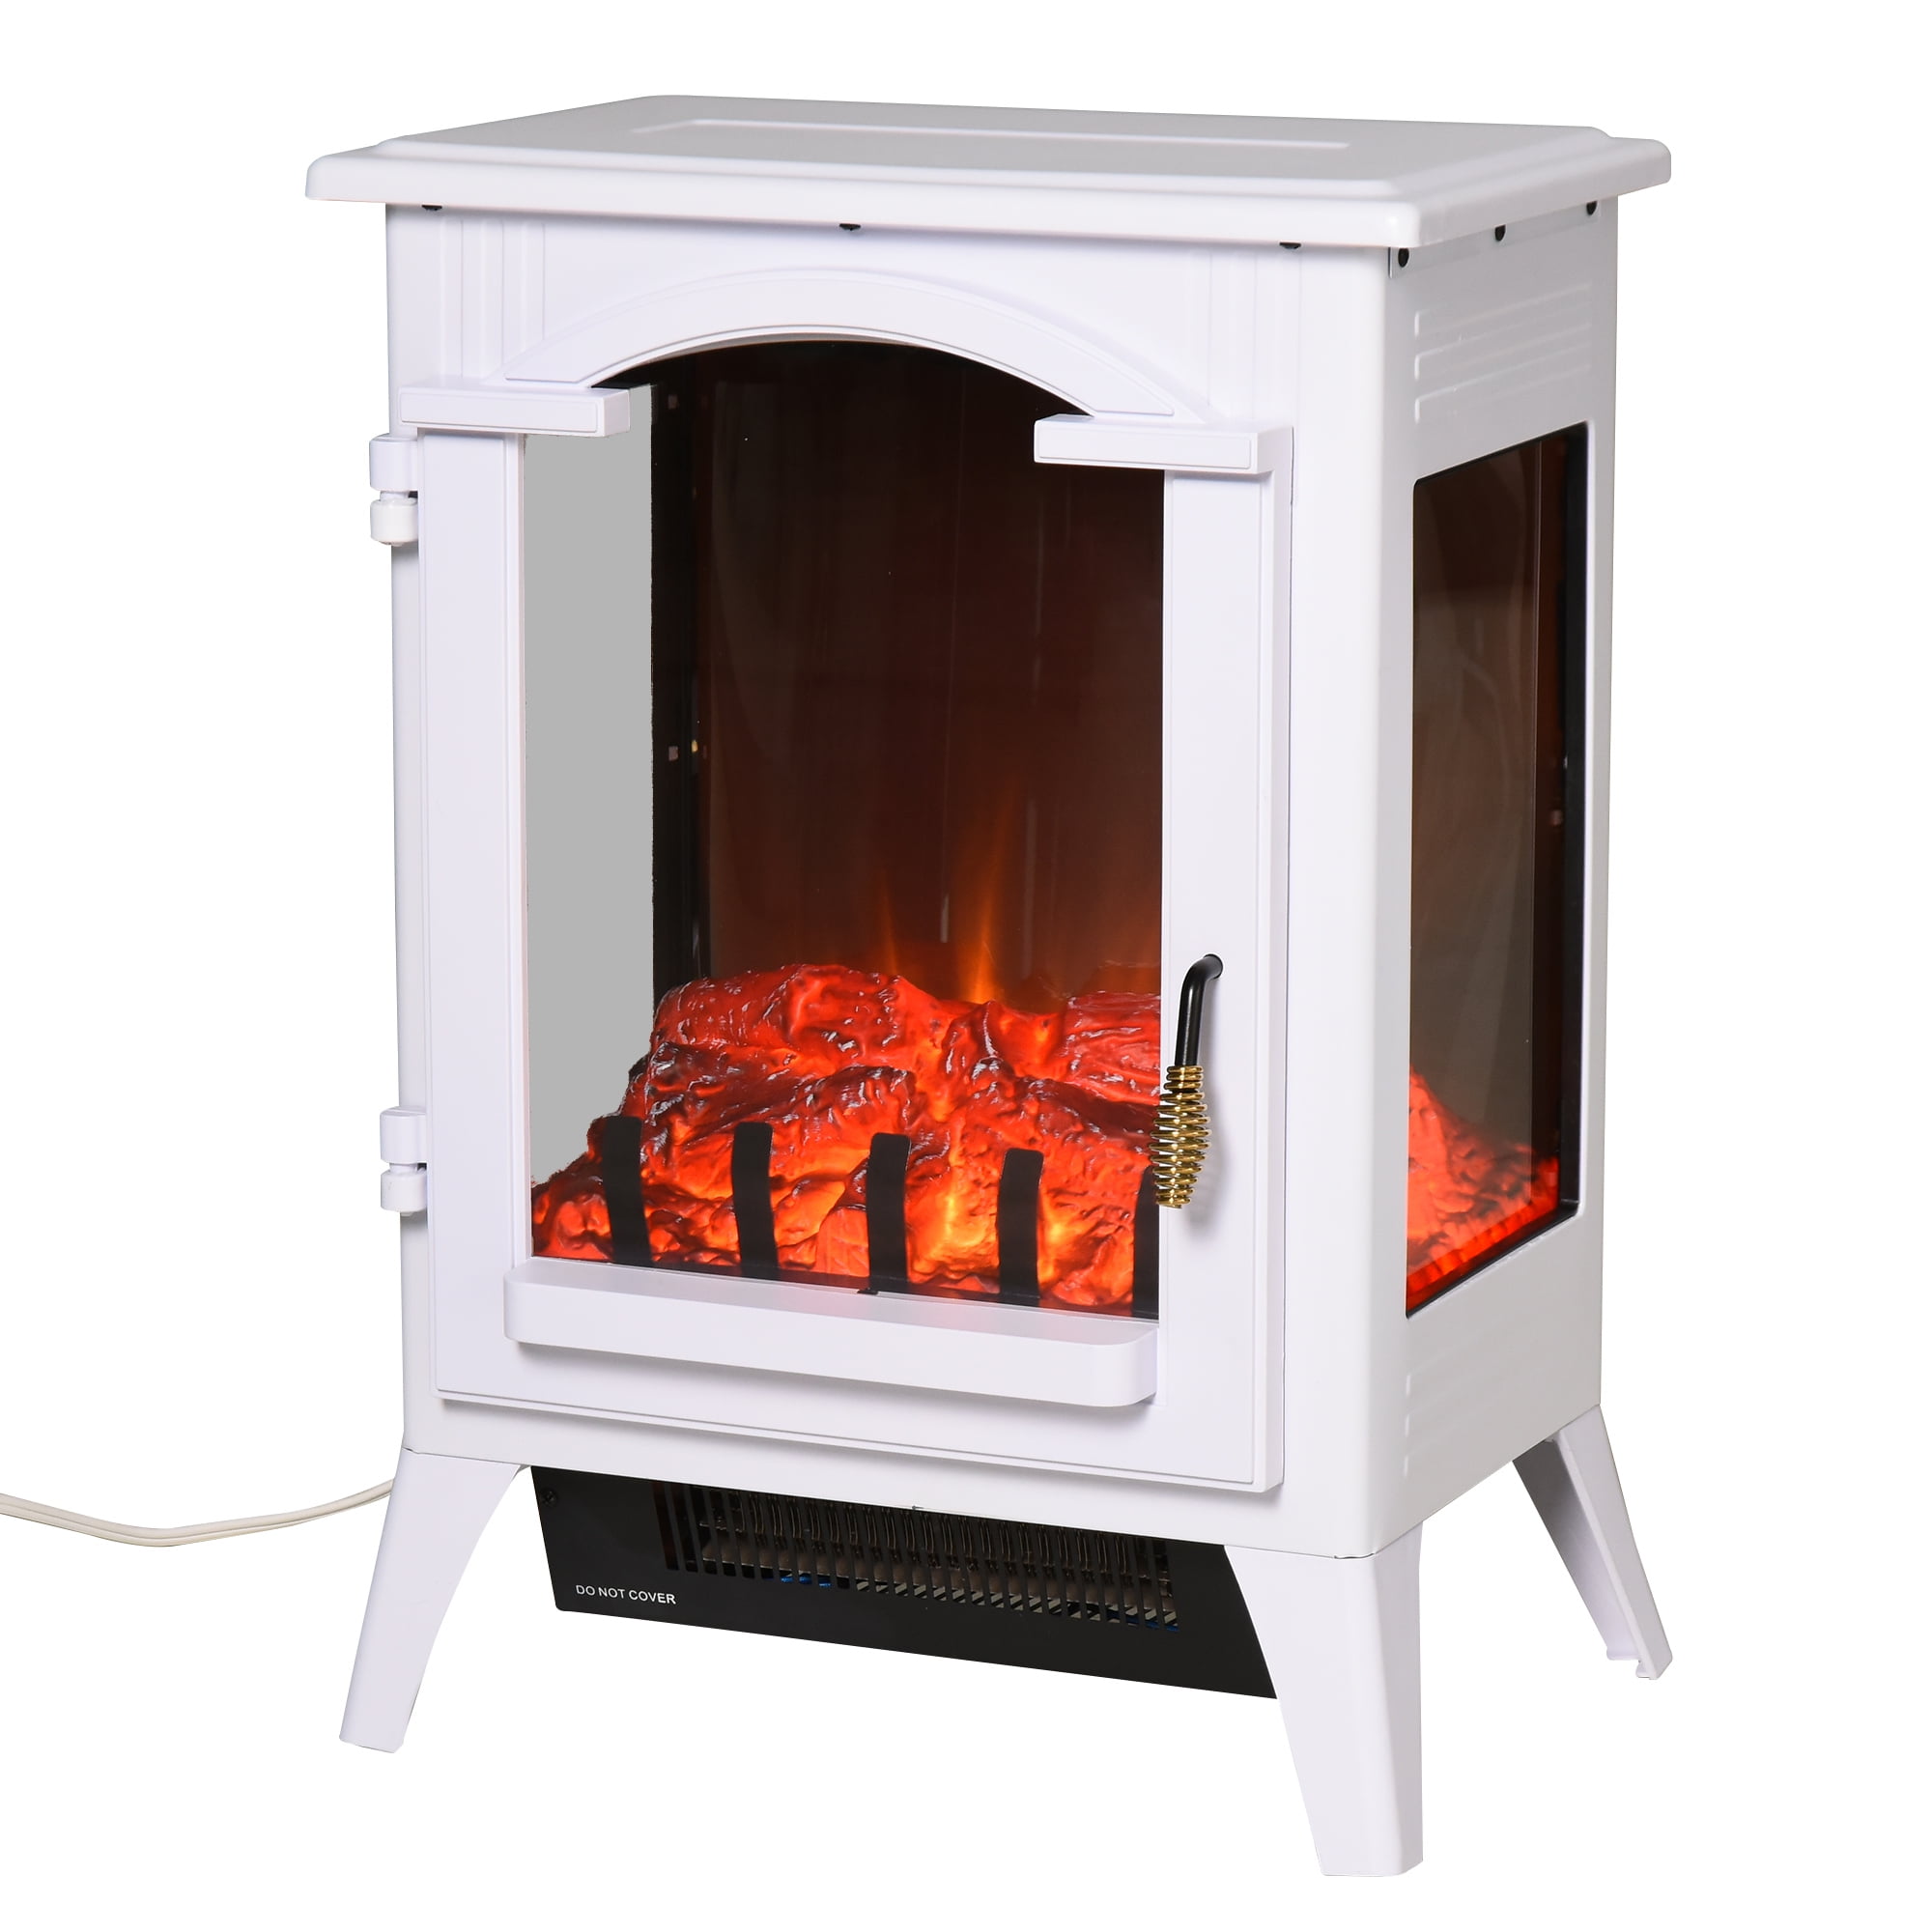 HOMCOM 750W/1500W Modern Electric Fireplace Heater with Realistic LED Faux Flame Effect